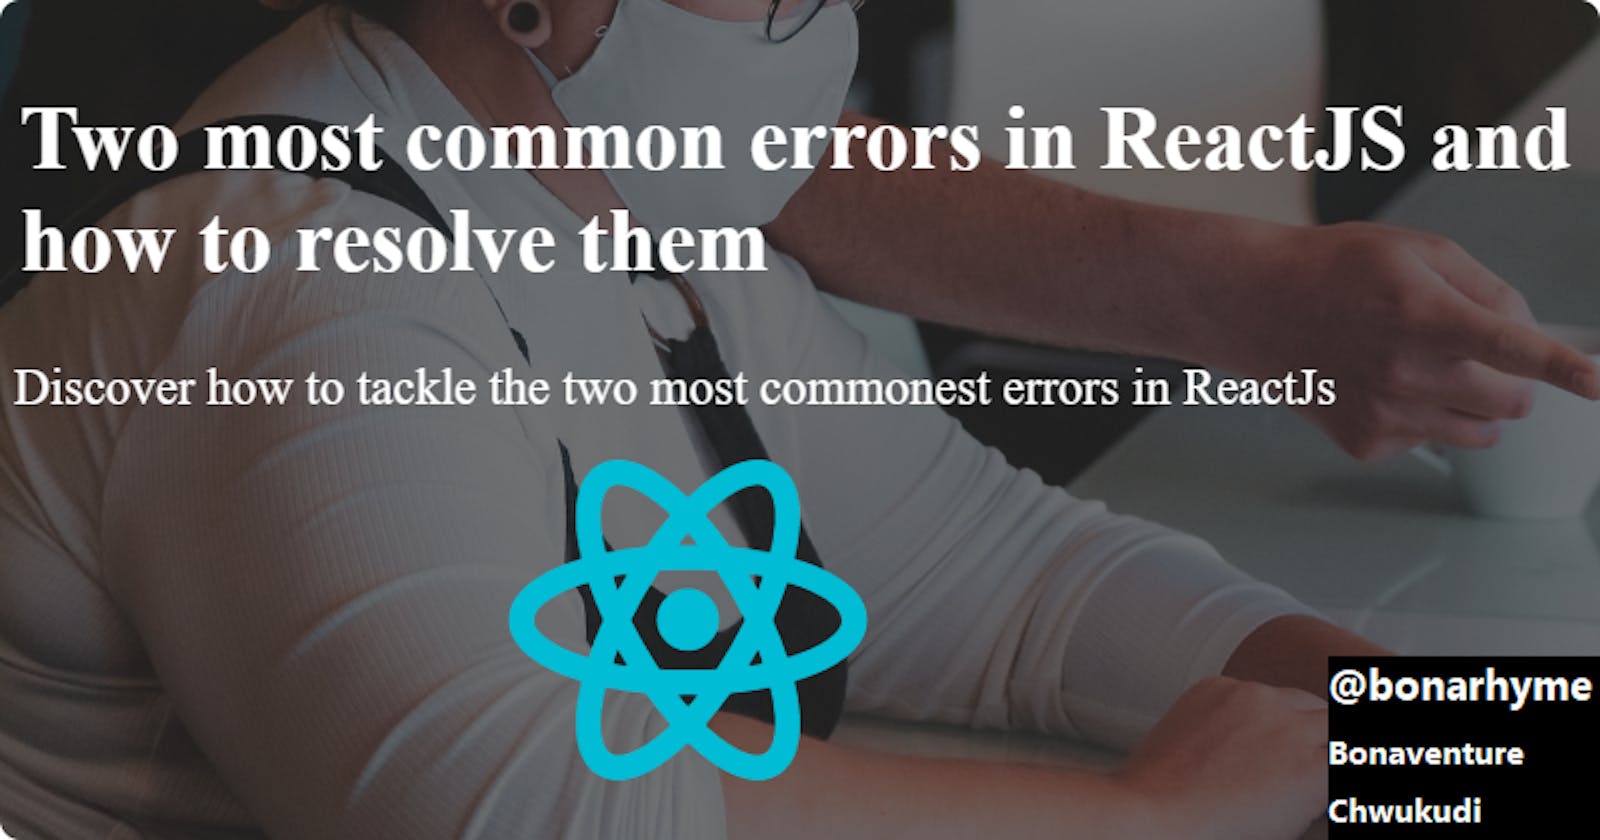 Two most common errors in ReactJS and how to resolve them